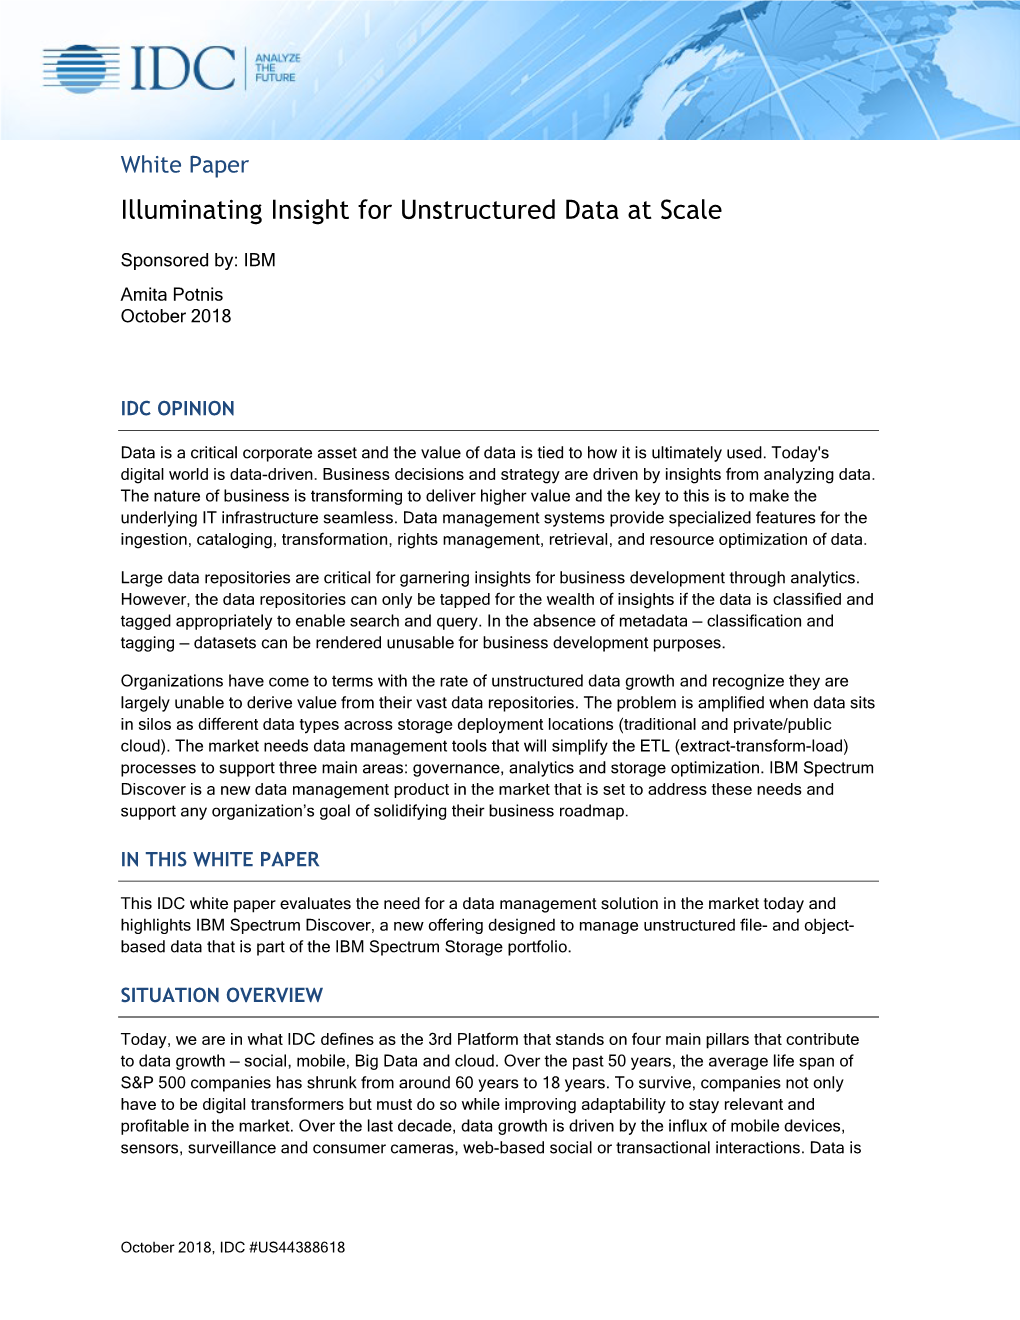 Illuminating Insight for Unstructured Data at Scale